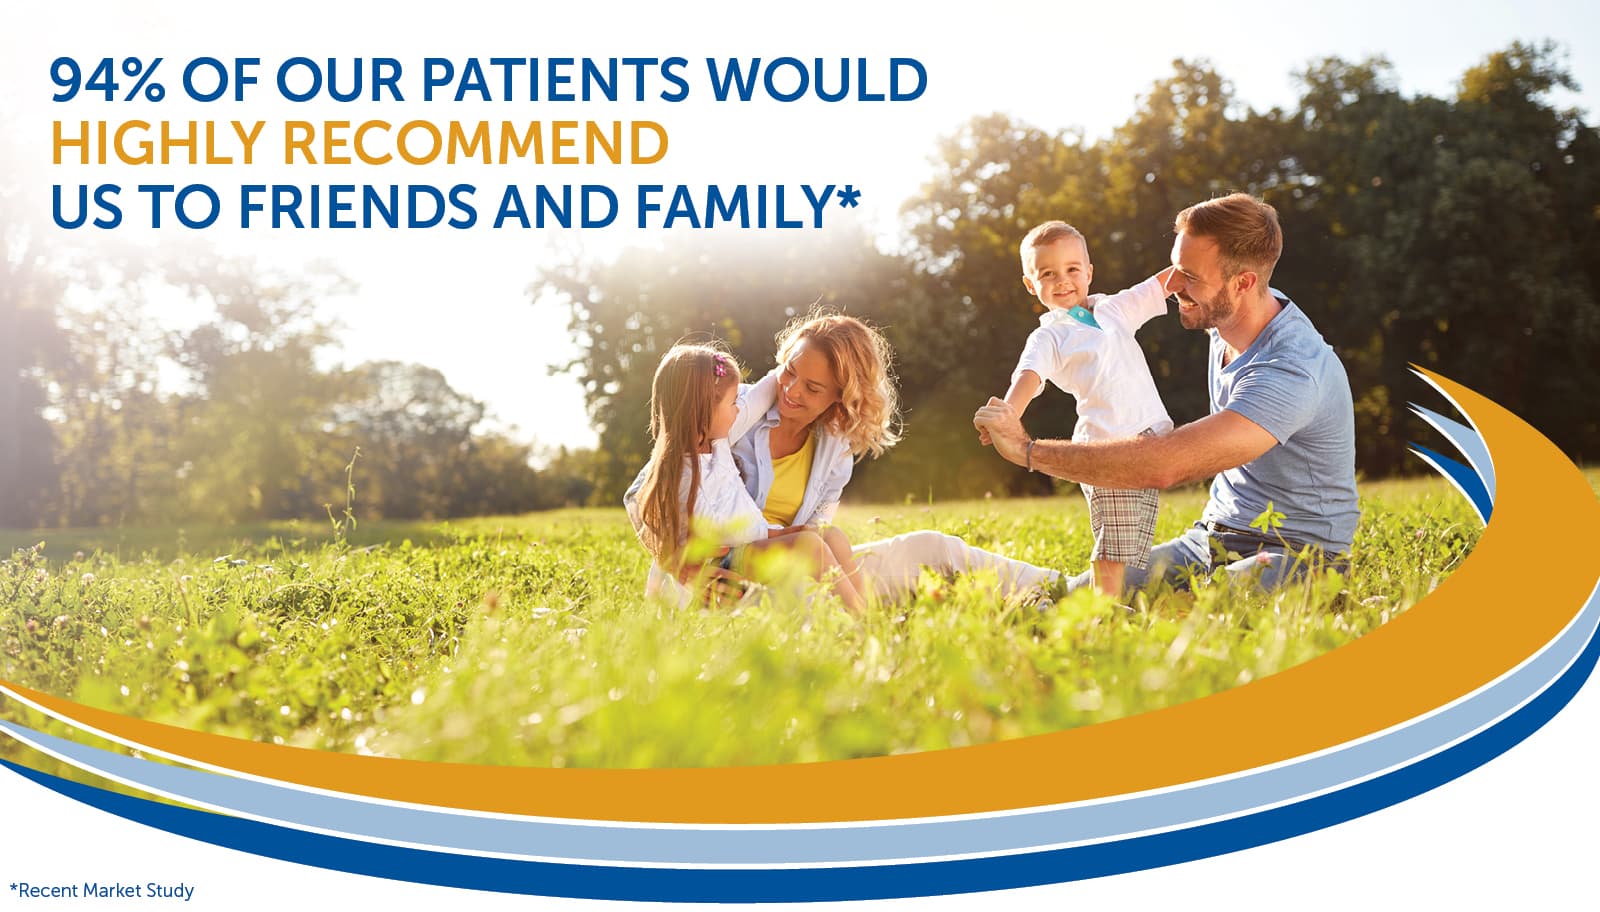 94% of Our Patients Would Highly Recommend Us to Friends and Family